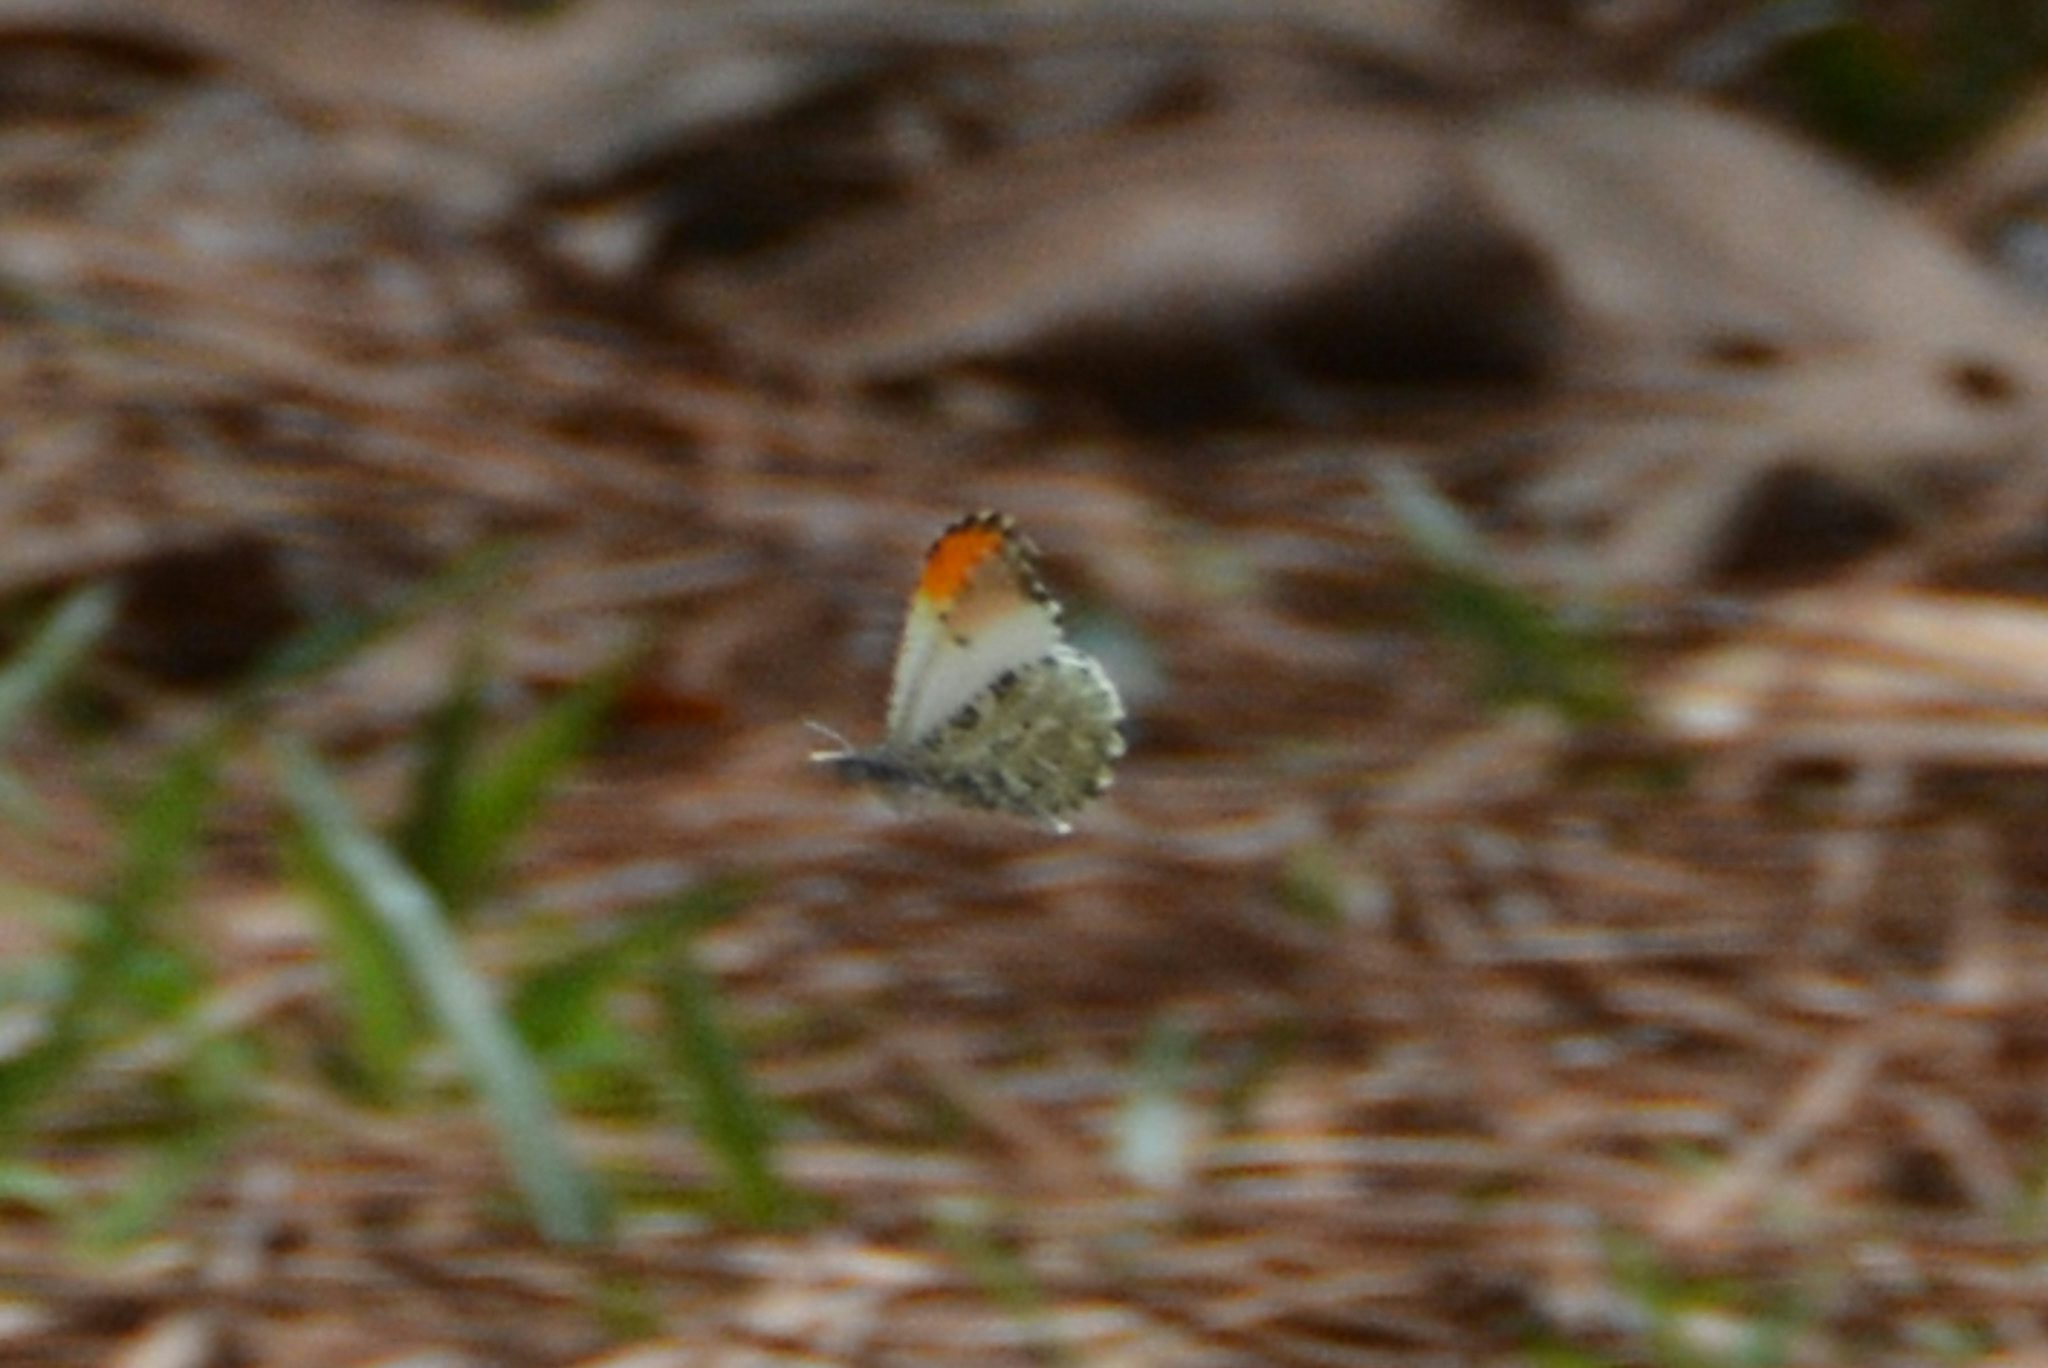 A blurry photo of a small mostly-white butterfly with orange tips on its wings flying by from right to left. The outside of its hindwing is pattern in gray and white